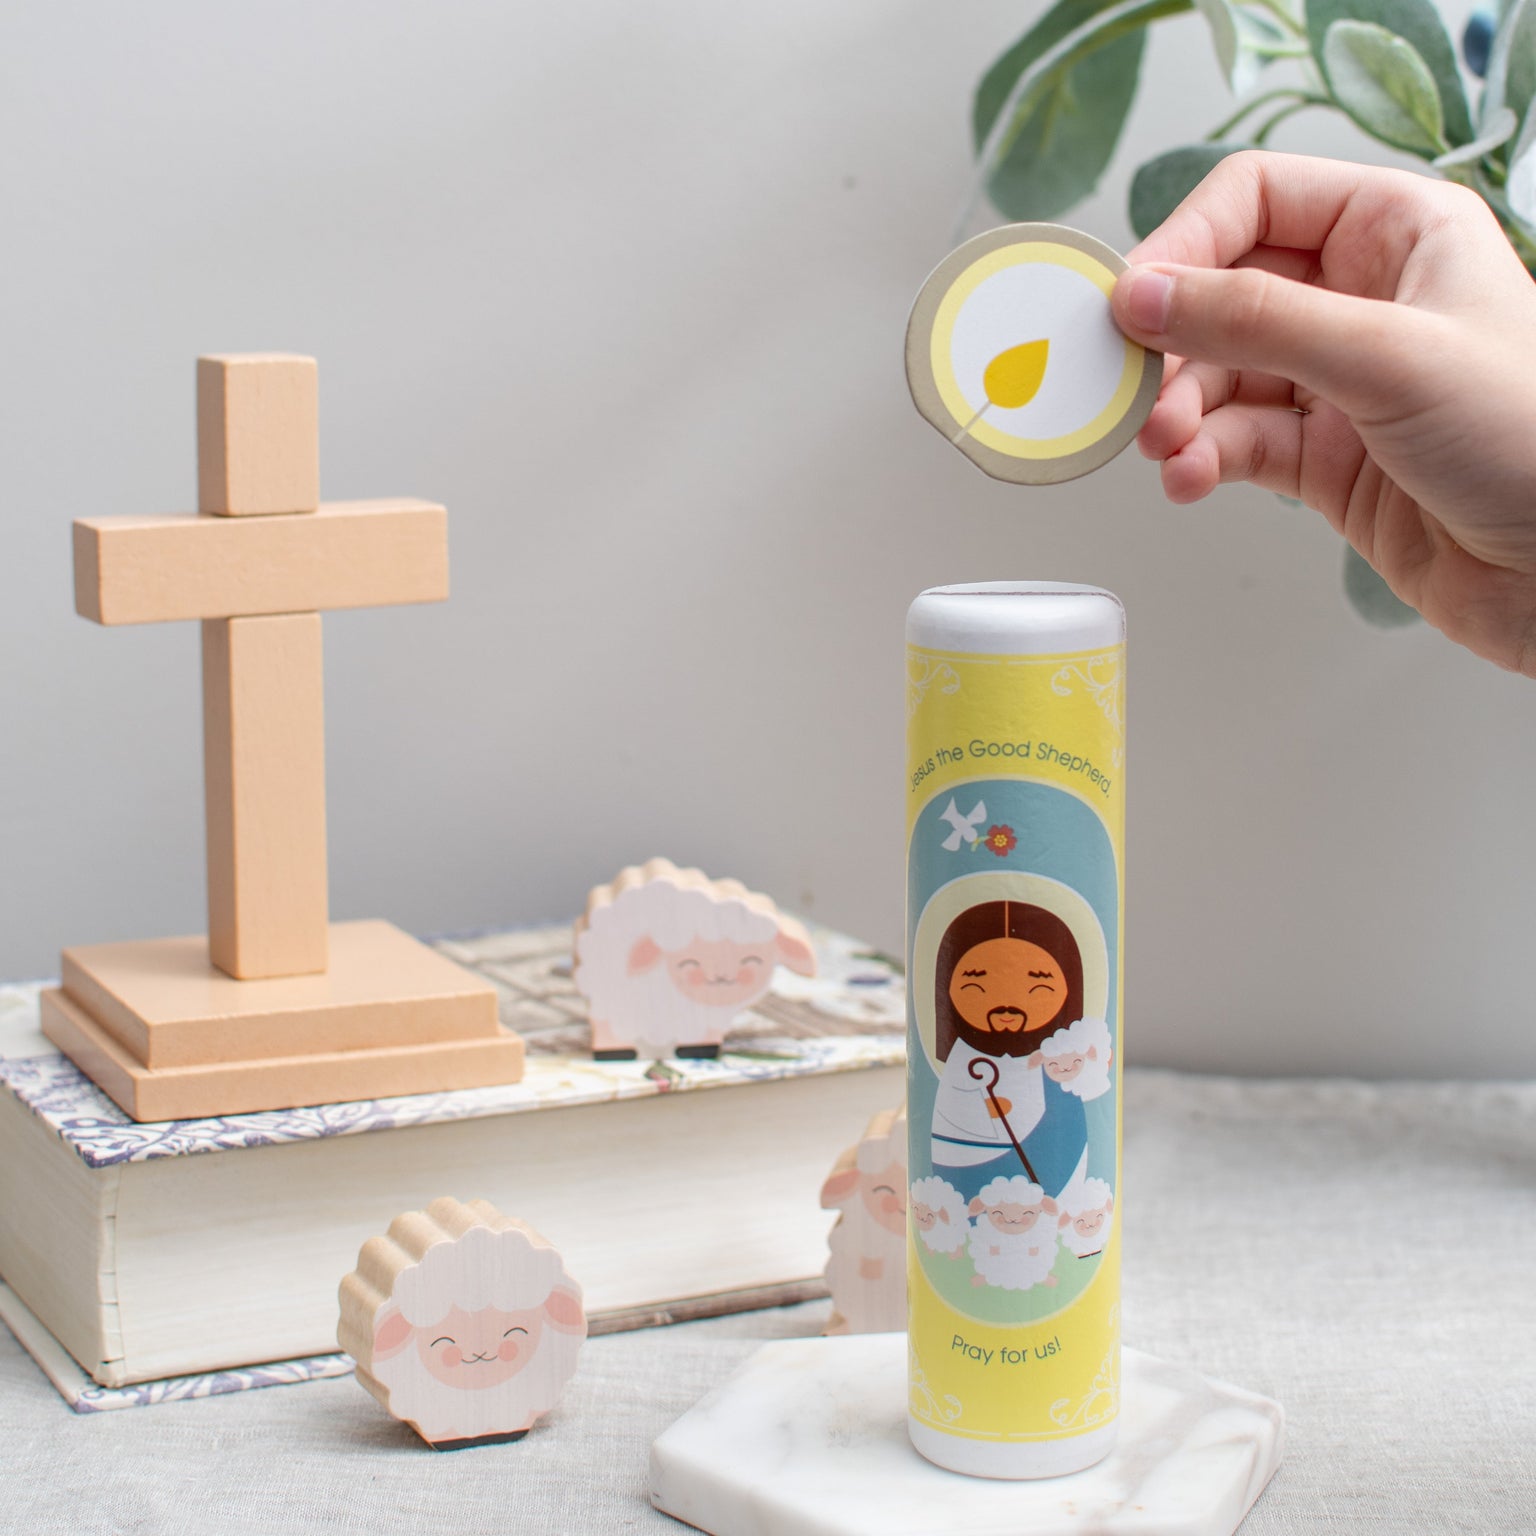 Jesus Christ, the Good Shepherd (The Our Father) Wooden Prayer Candle